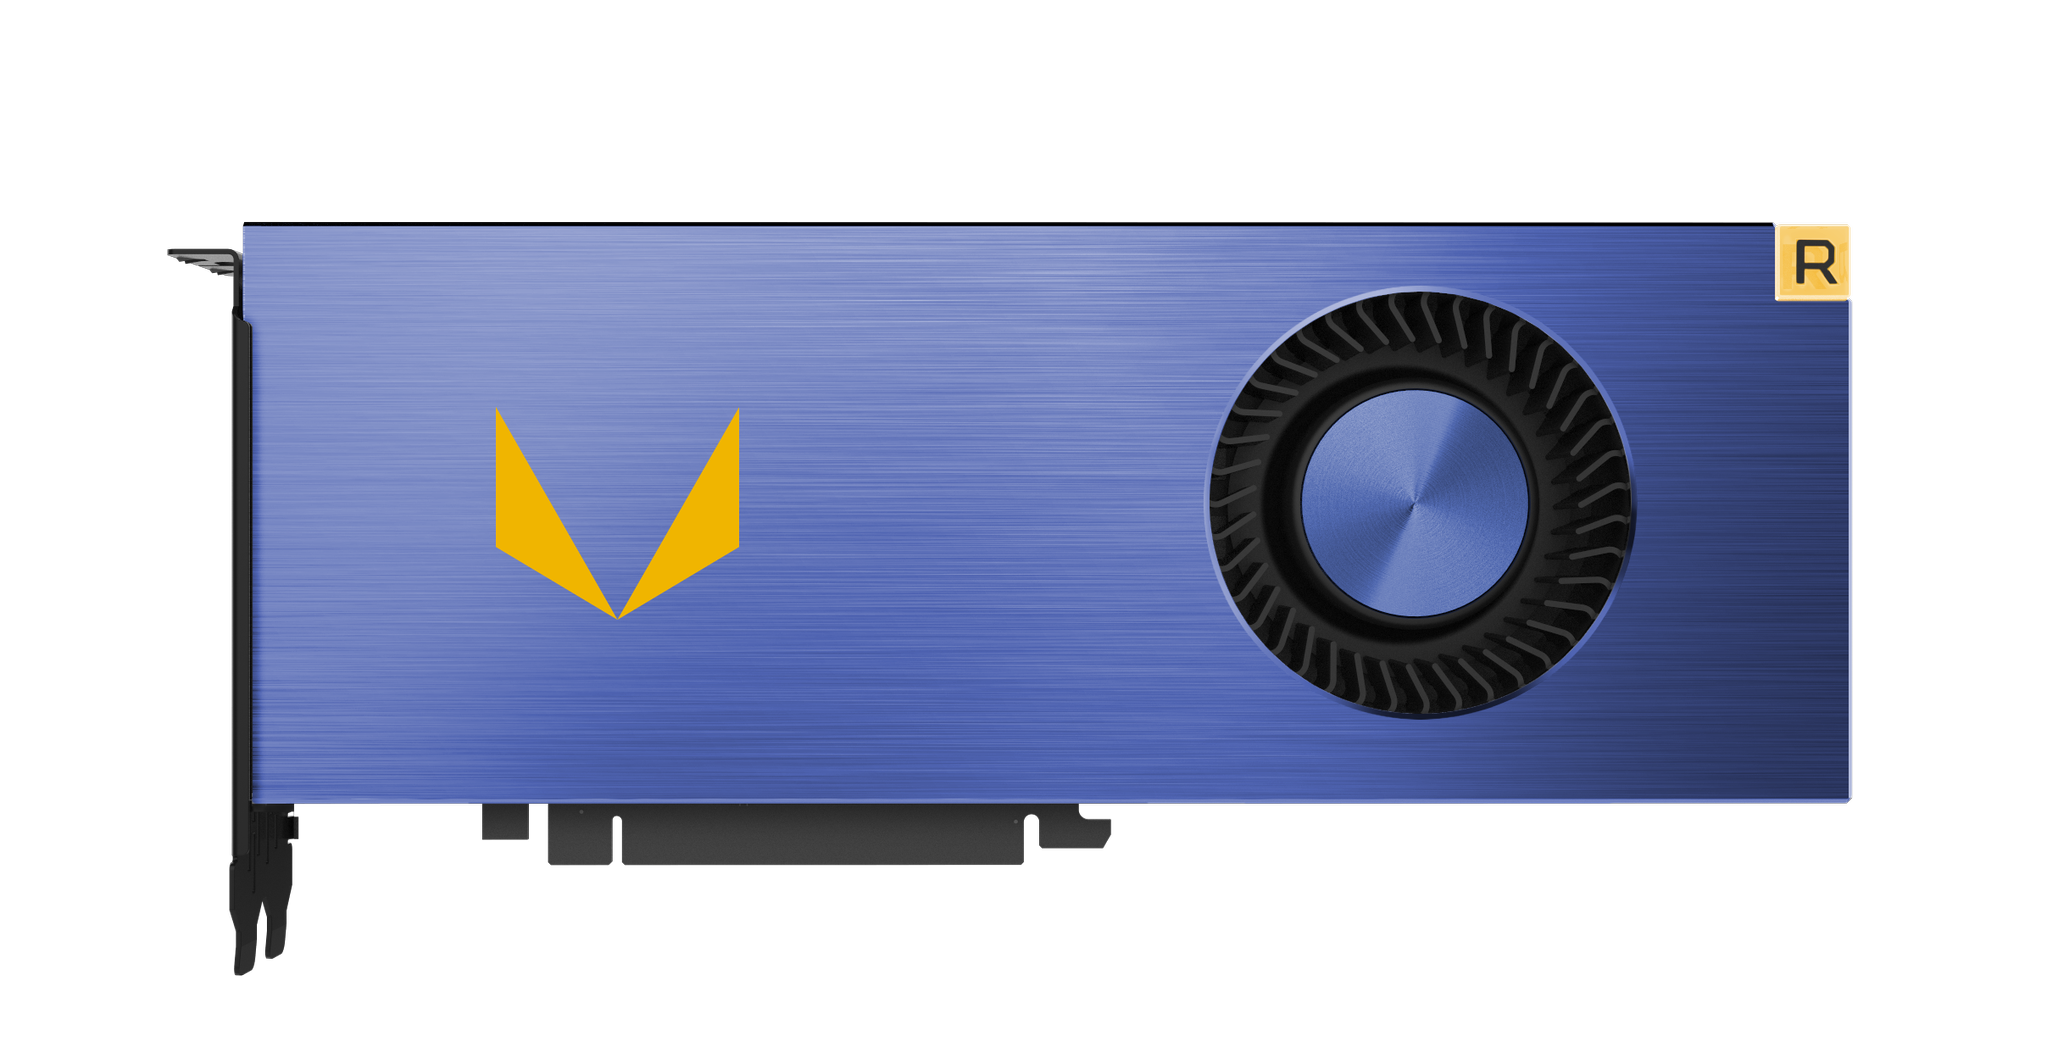 Media asset in full size related to 3dfxzone.it news item entitled as follows: AMD ha immesso sul mercato finora oltre 25.000 video card con GPU Vega? | Image Name: news26935_AMD-Radeon-Vega-Frontier-Edition_1.png